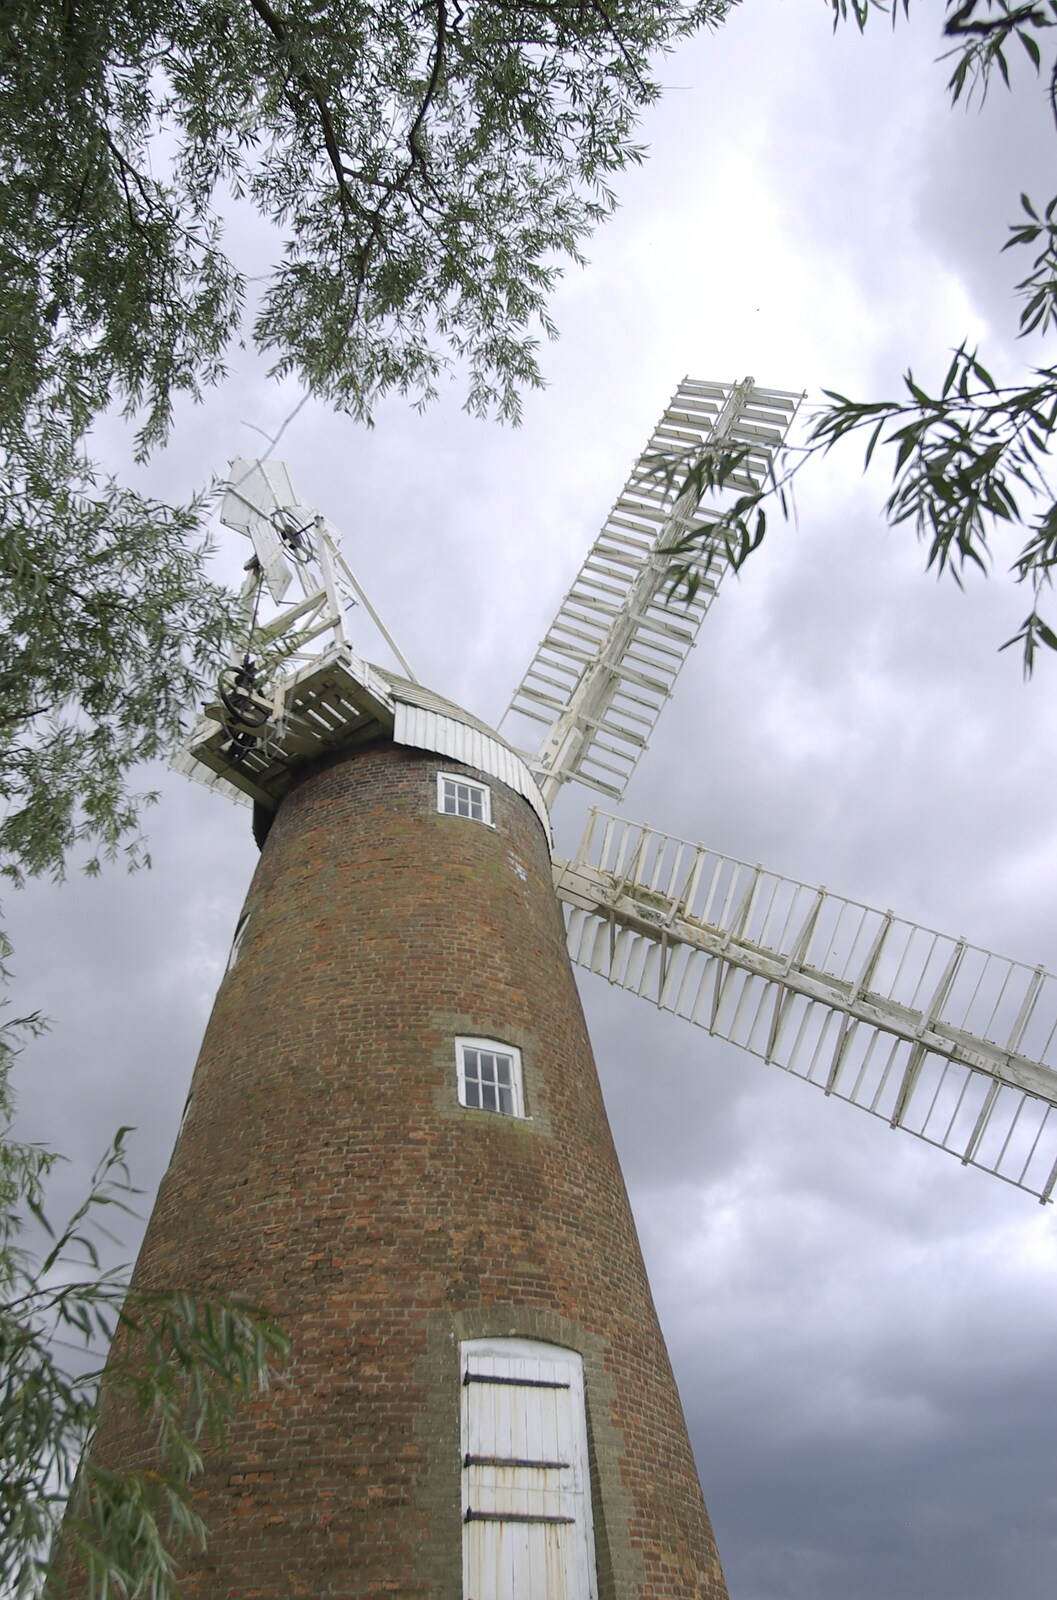 Billingford windmill surrounded by trees from Meeting Lucy, and The BBs play Weybread, Cambridge and Norfolk - 21st July 2007